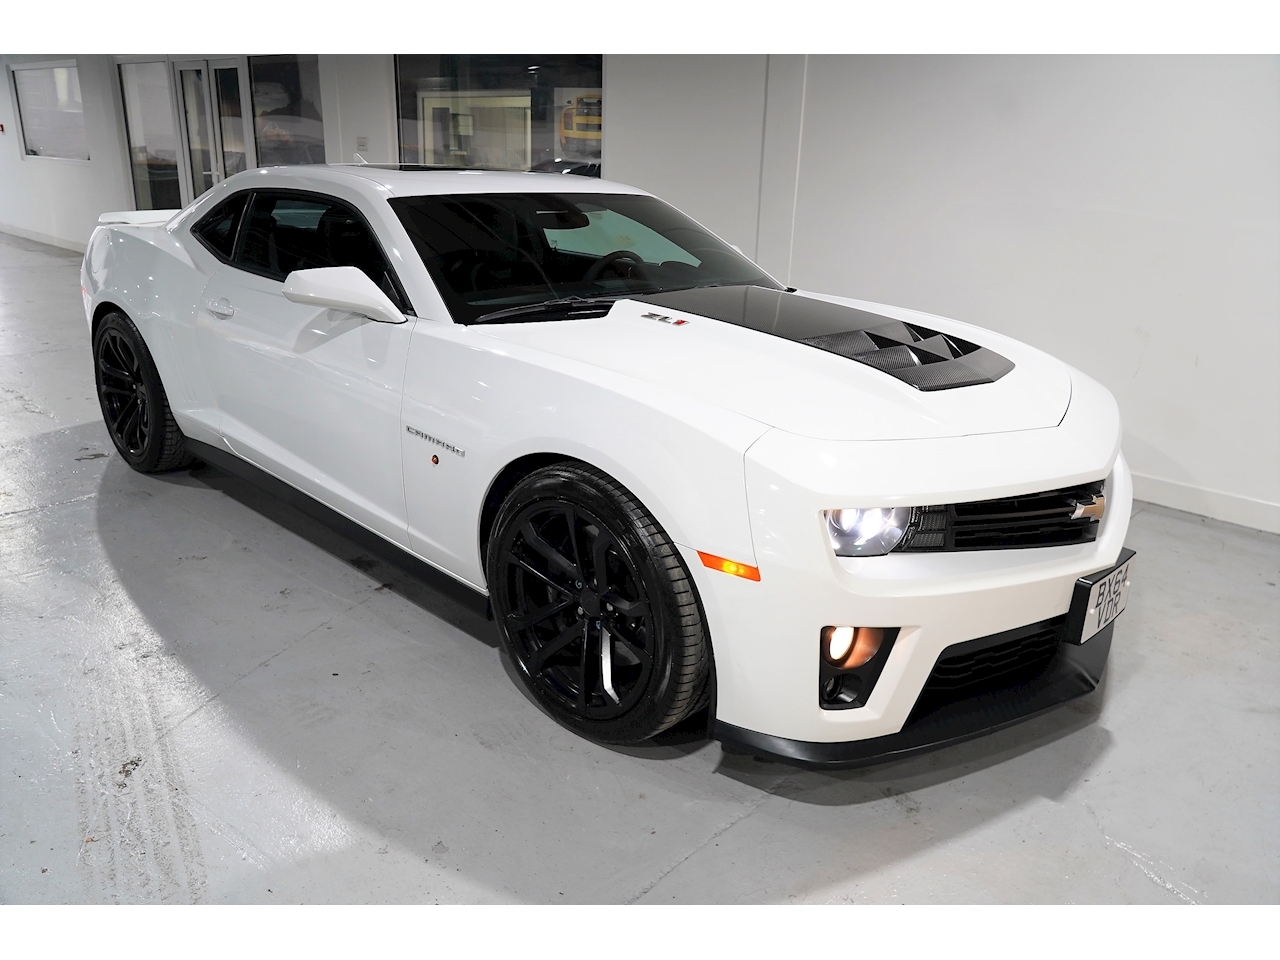 2015 Chevrolet Camaro ZL1 - Factory Supercharged 580 LSA - Left Hand Drive